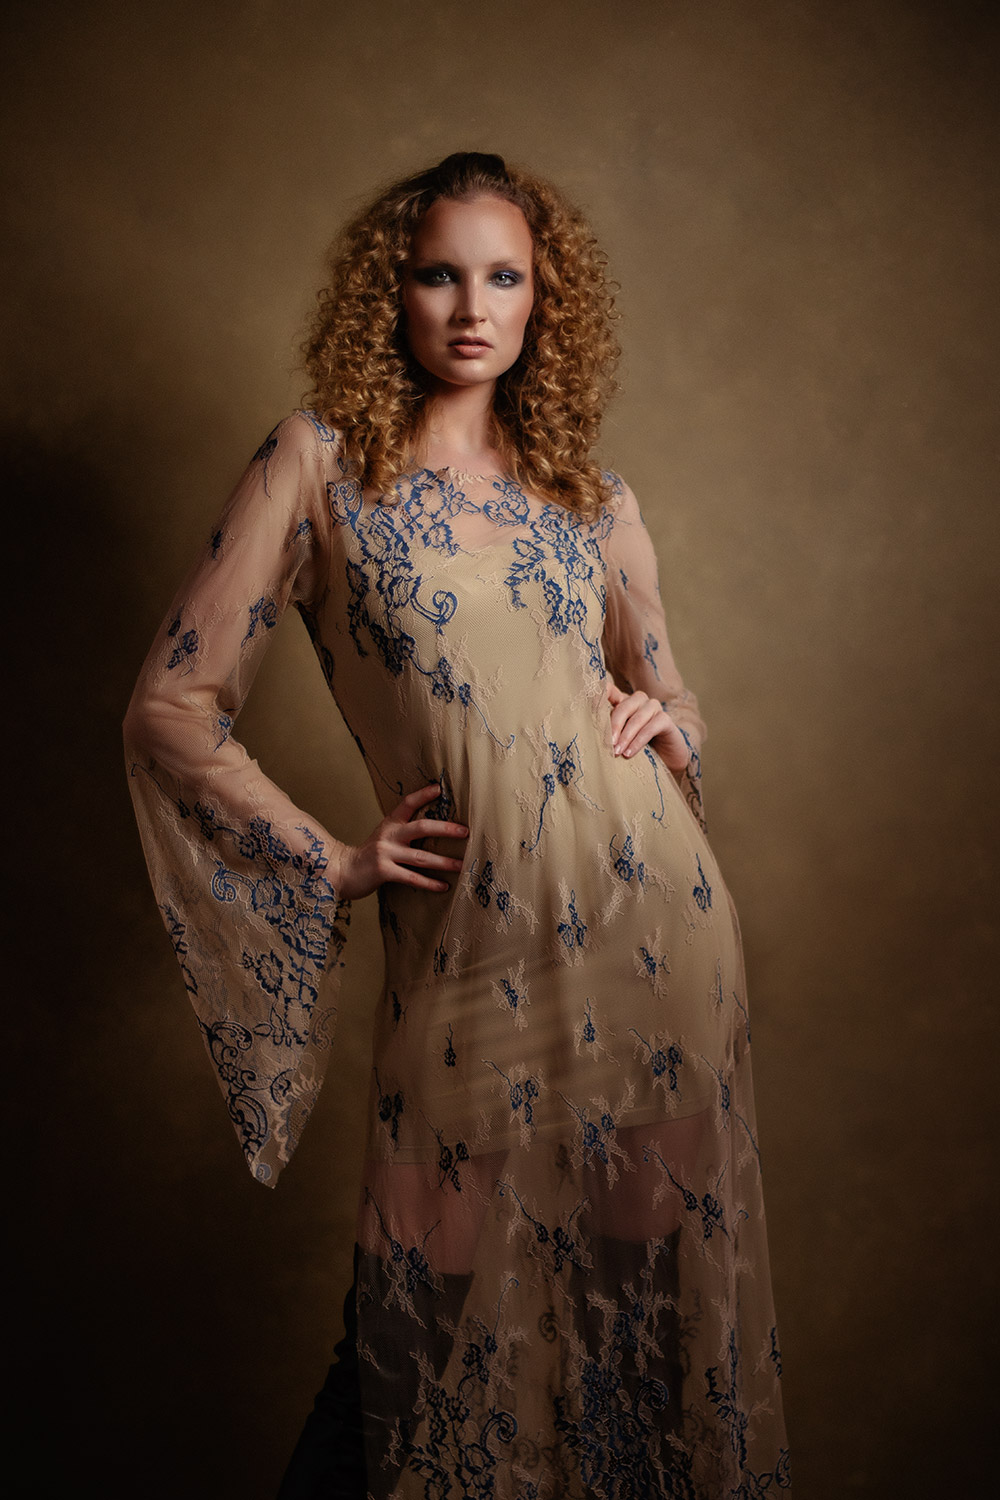 curly blonde woman striking a dramatic pose with hands on hips in sheer dress with blue embroidery